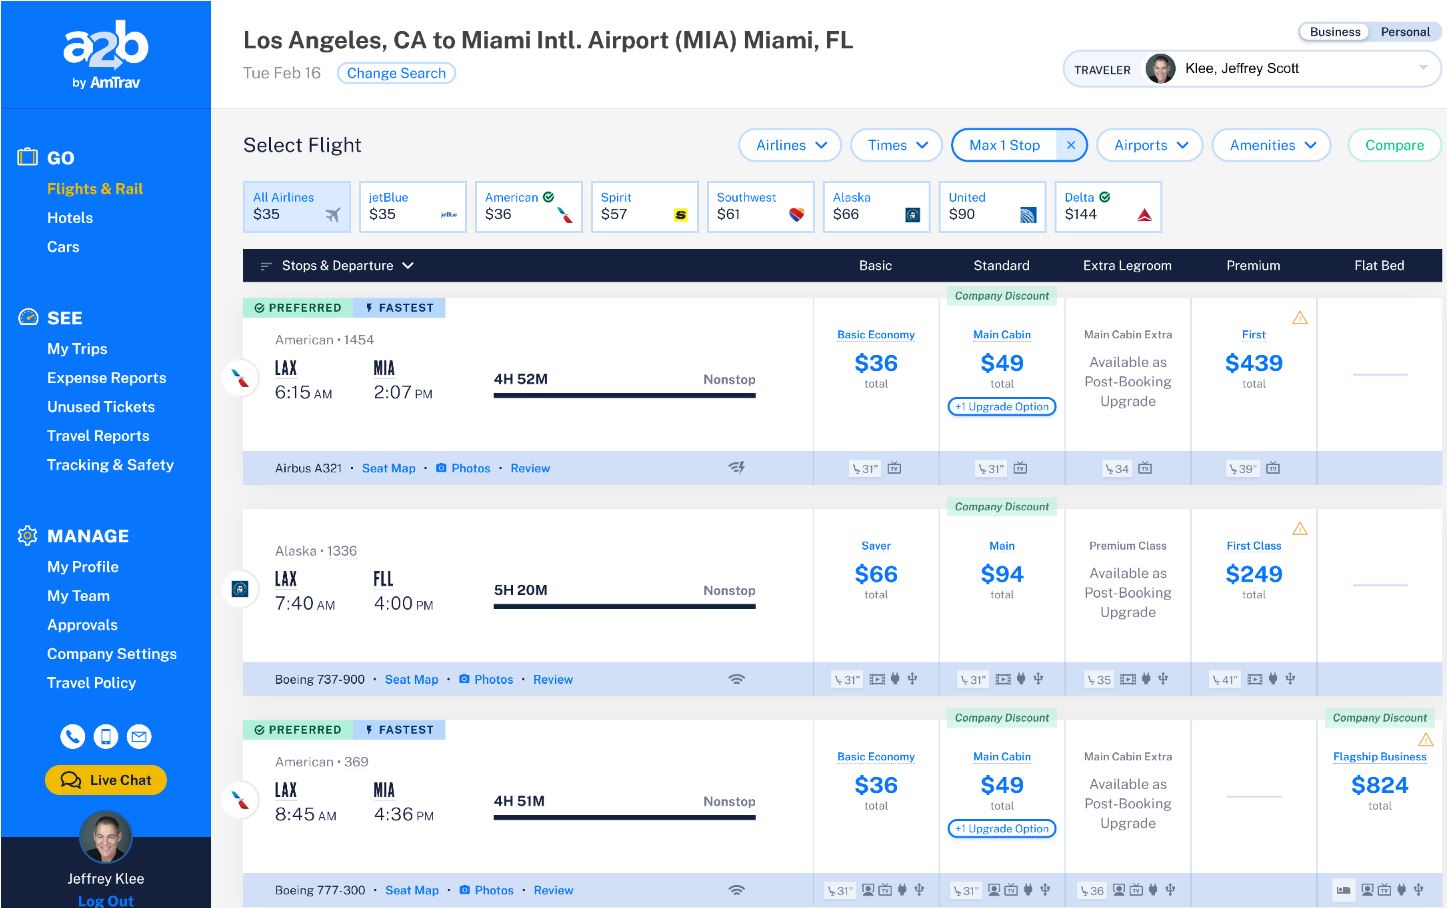 Why I'm So Excited About AmTrav's New Flight Shopping Tool